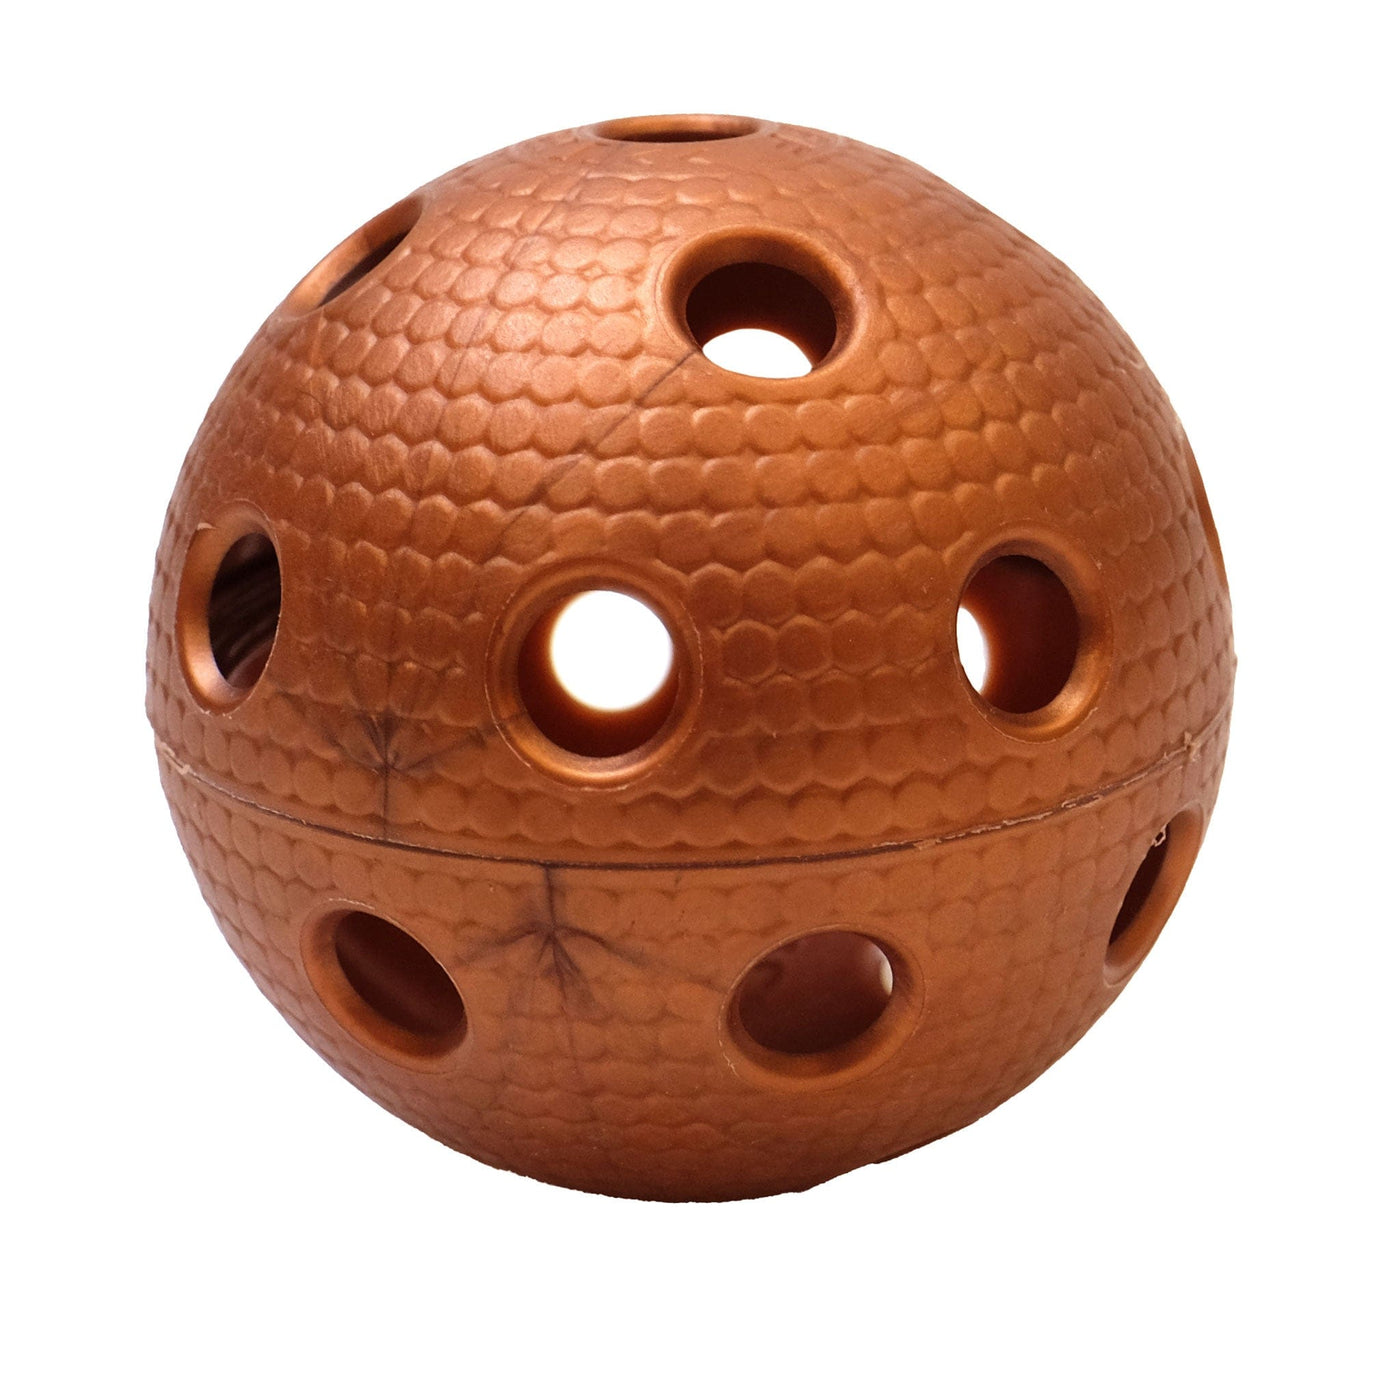 Small plastic ball used for Floorball. Floorball, pickleball, wiffle, wiffleball, plastic ball, ball with holes, ball with pock marks.